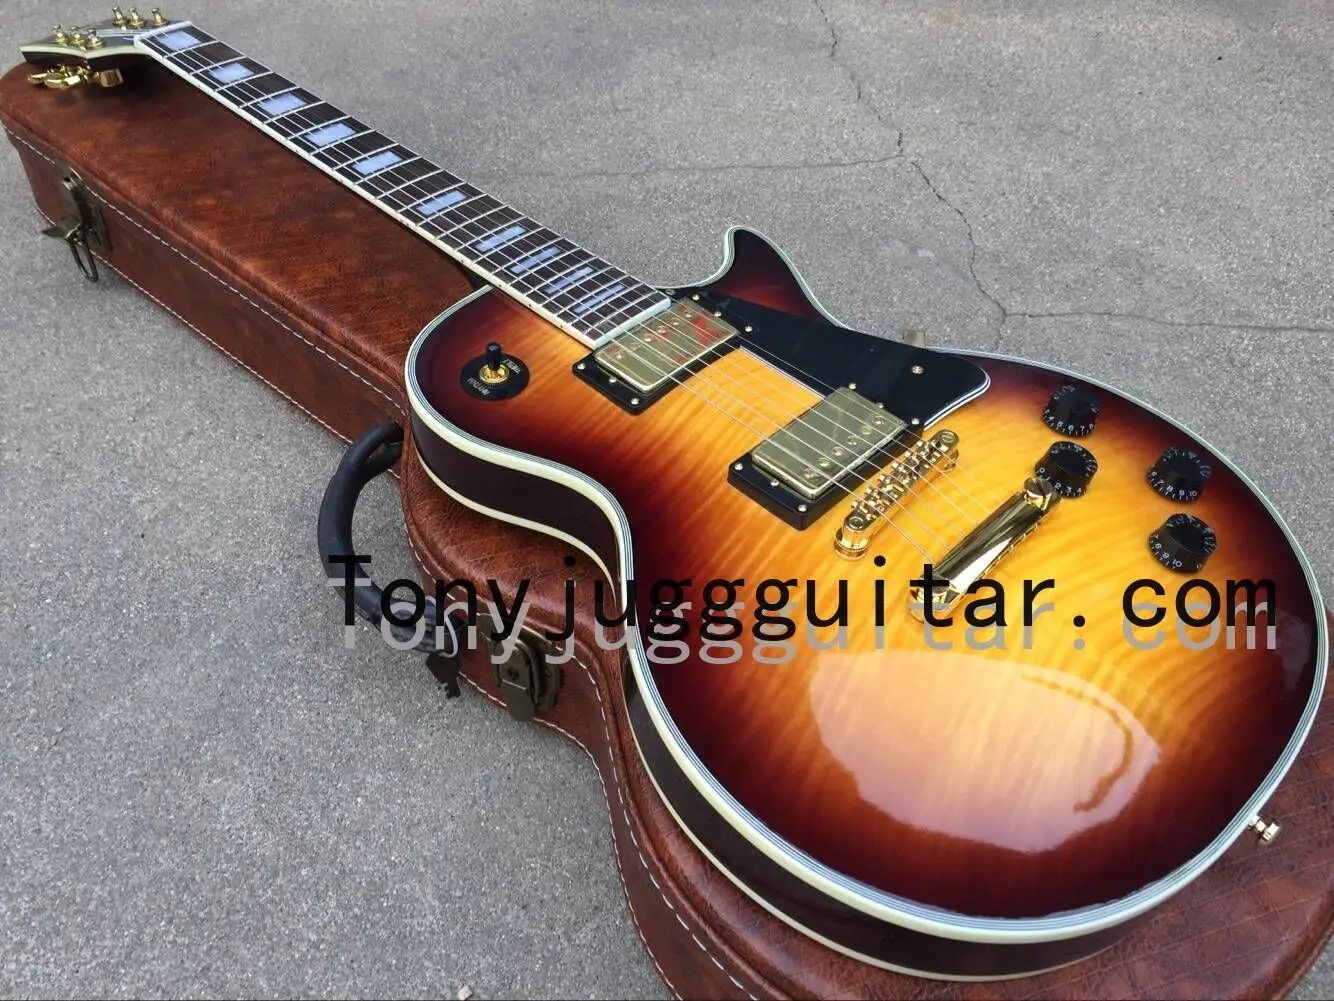 

Custom 1959 Flame Maple Top Vintage Sunburst Electric Guitar 5 Ply Body binding Rosewood Fingerboard Trapezoid